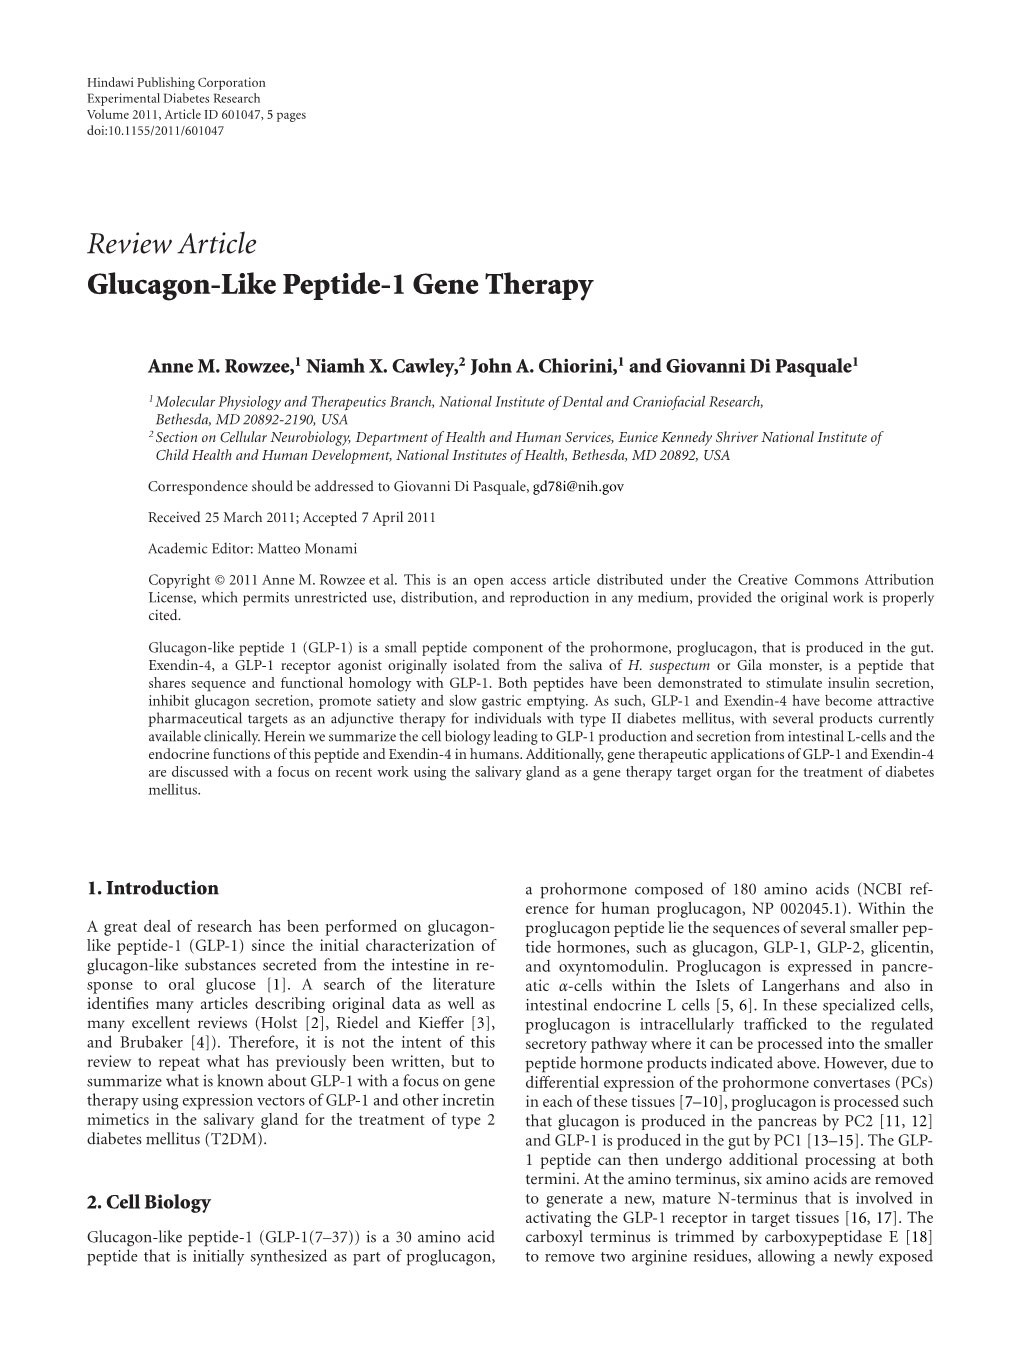 Review Article Glucagon-Like Peptide-1 Gene Therapy